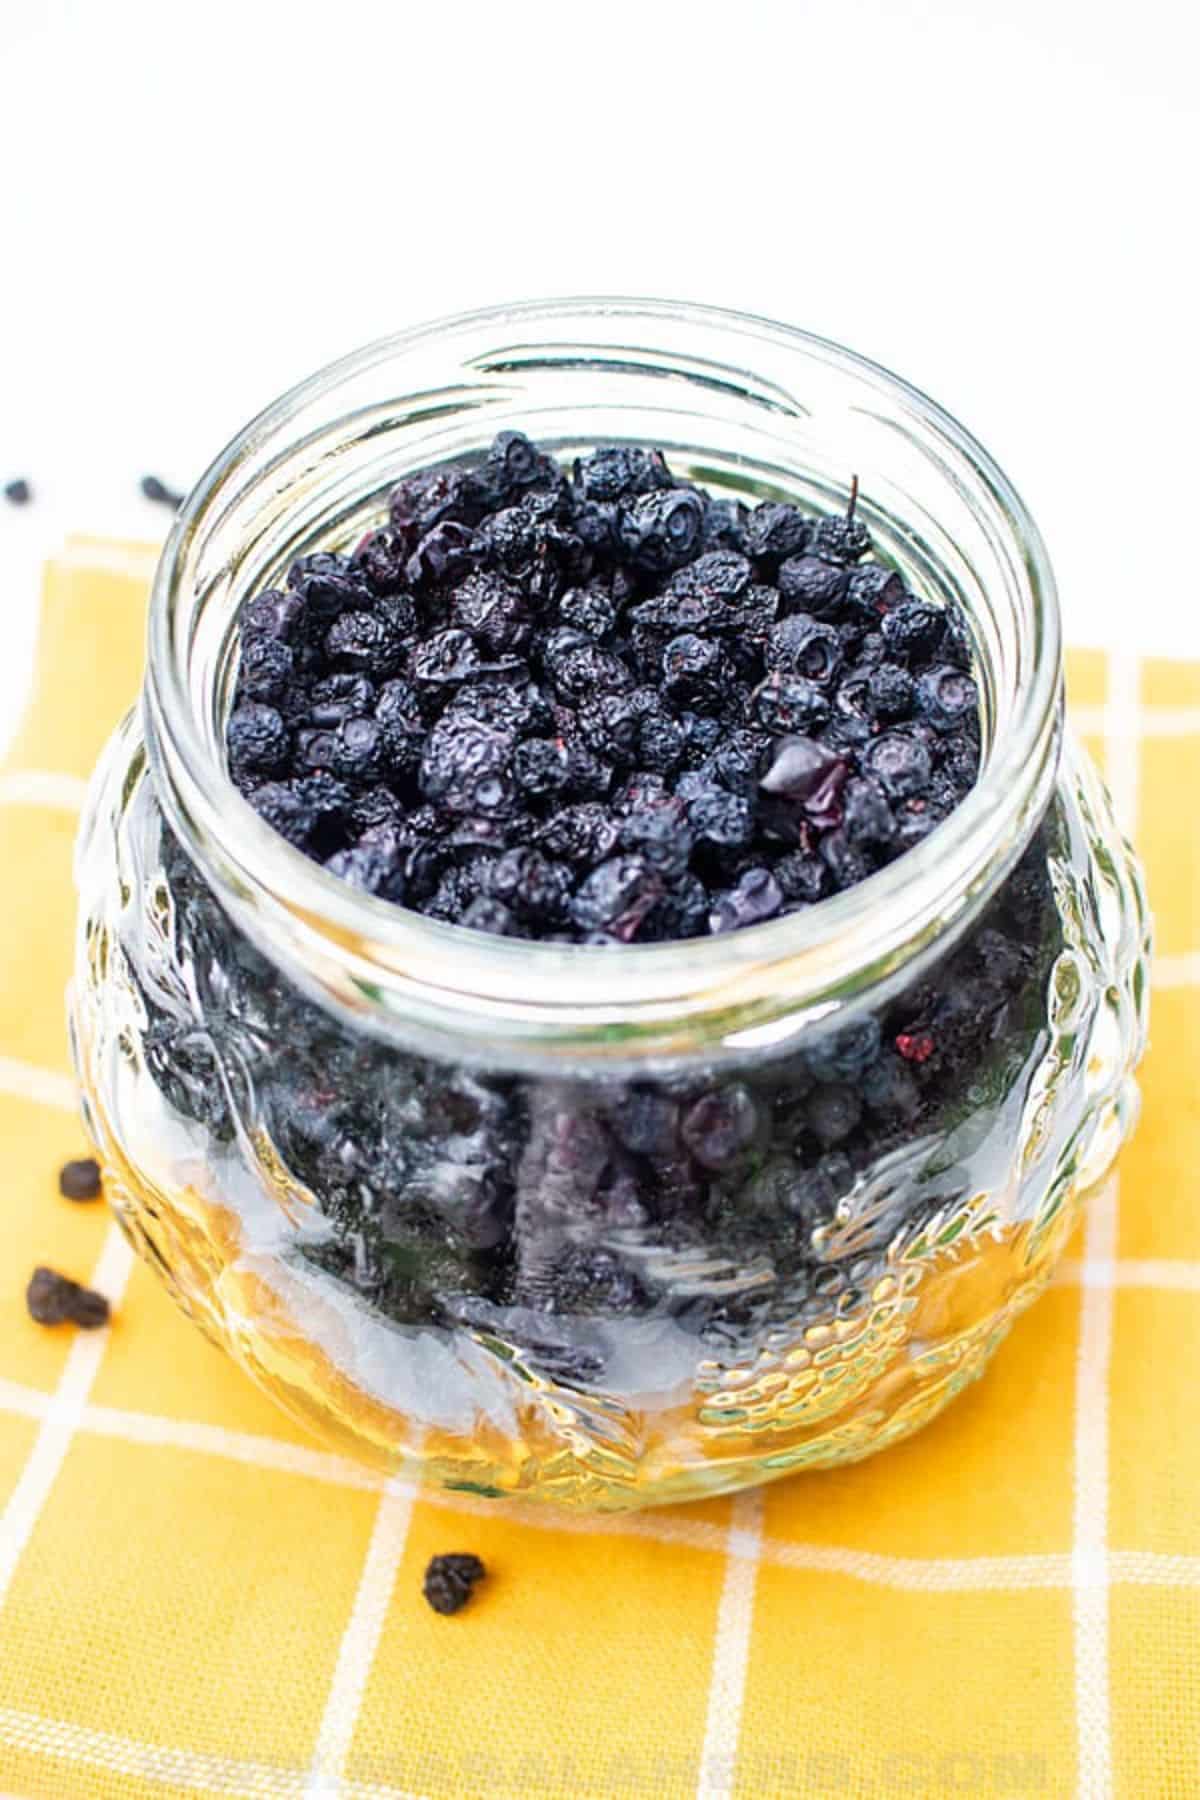 A glass jar of dehydrated blueberries.